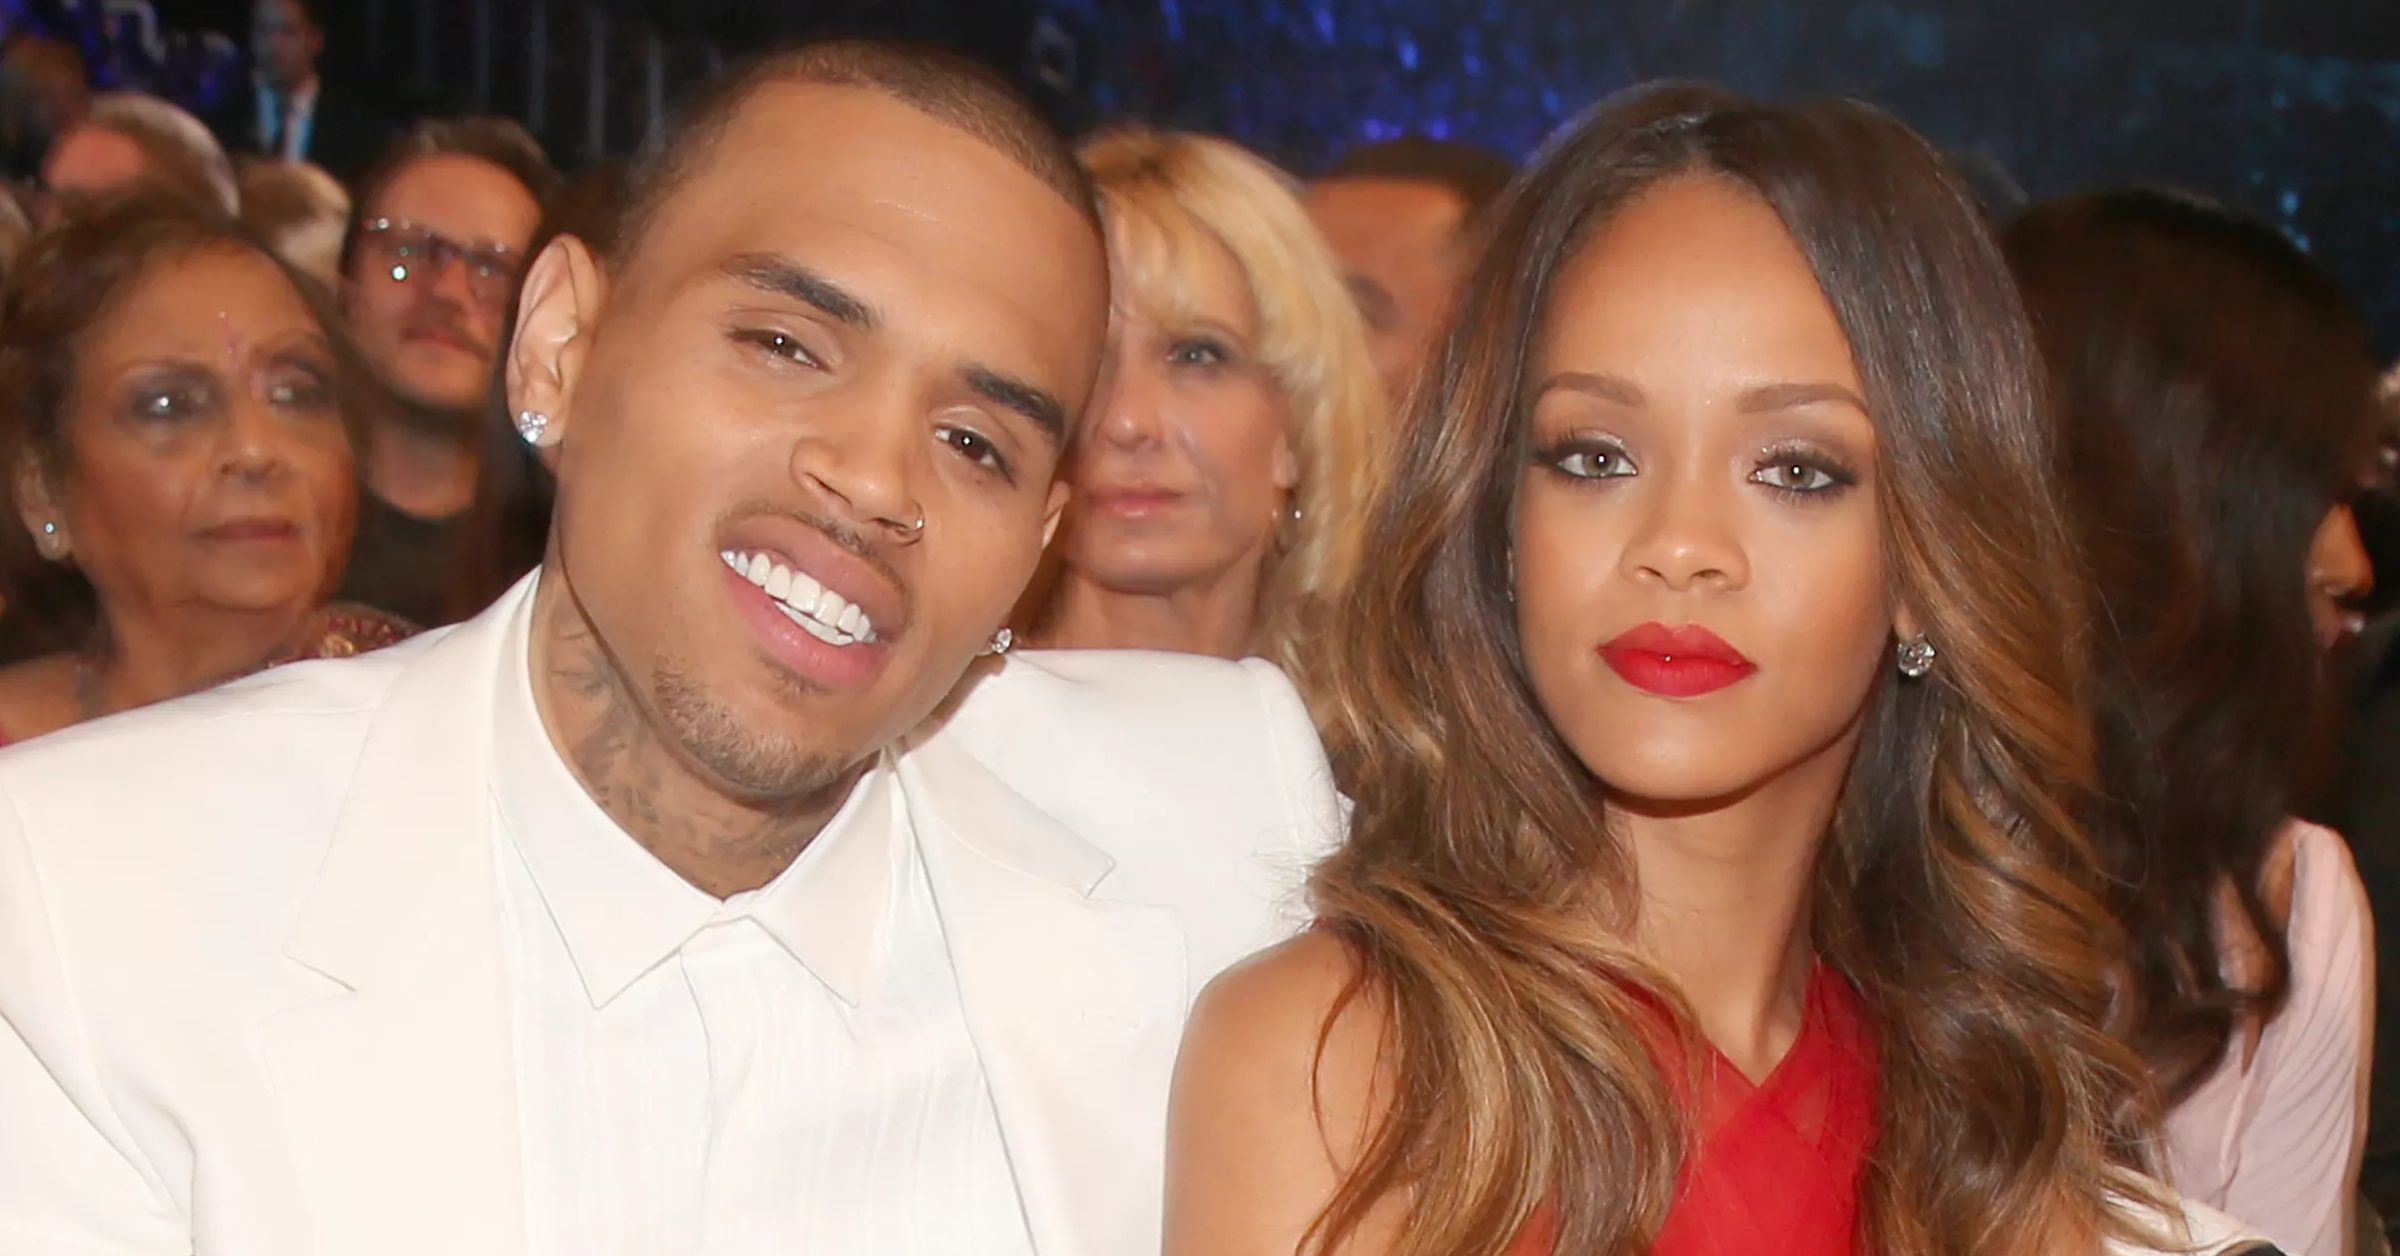 Chris Brown Sparks Romance Rumors With Rihanna After Suggestive 